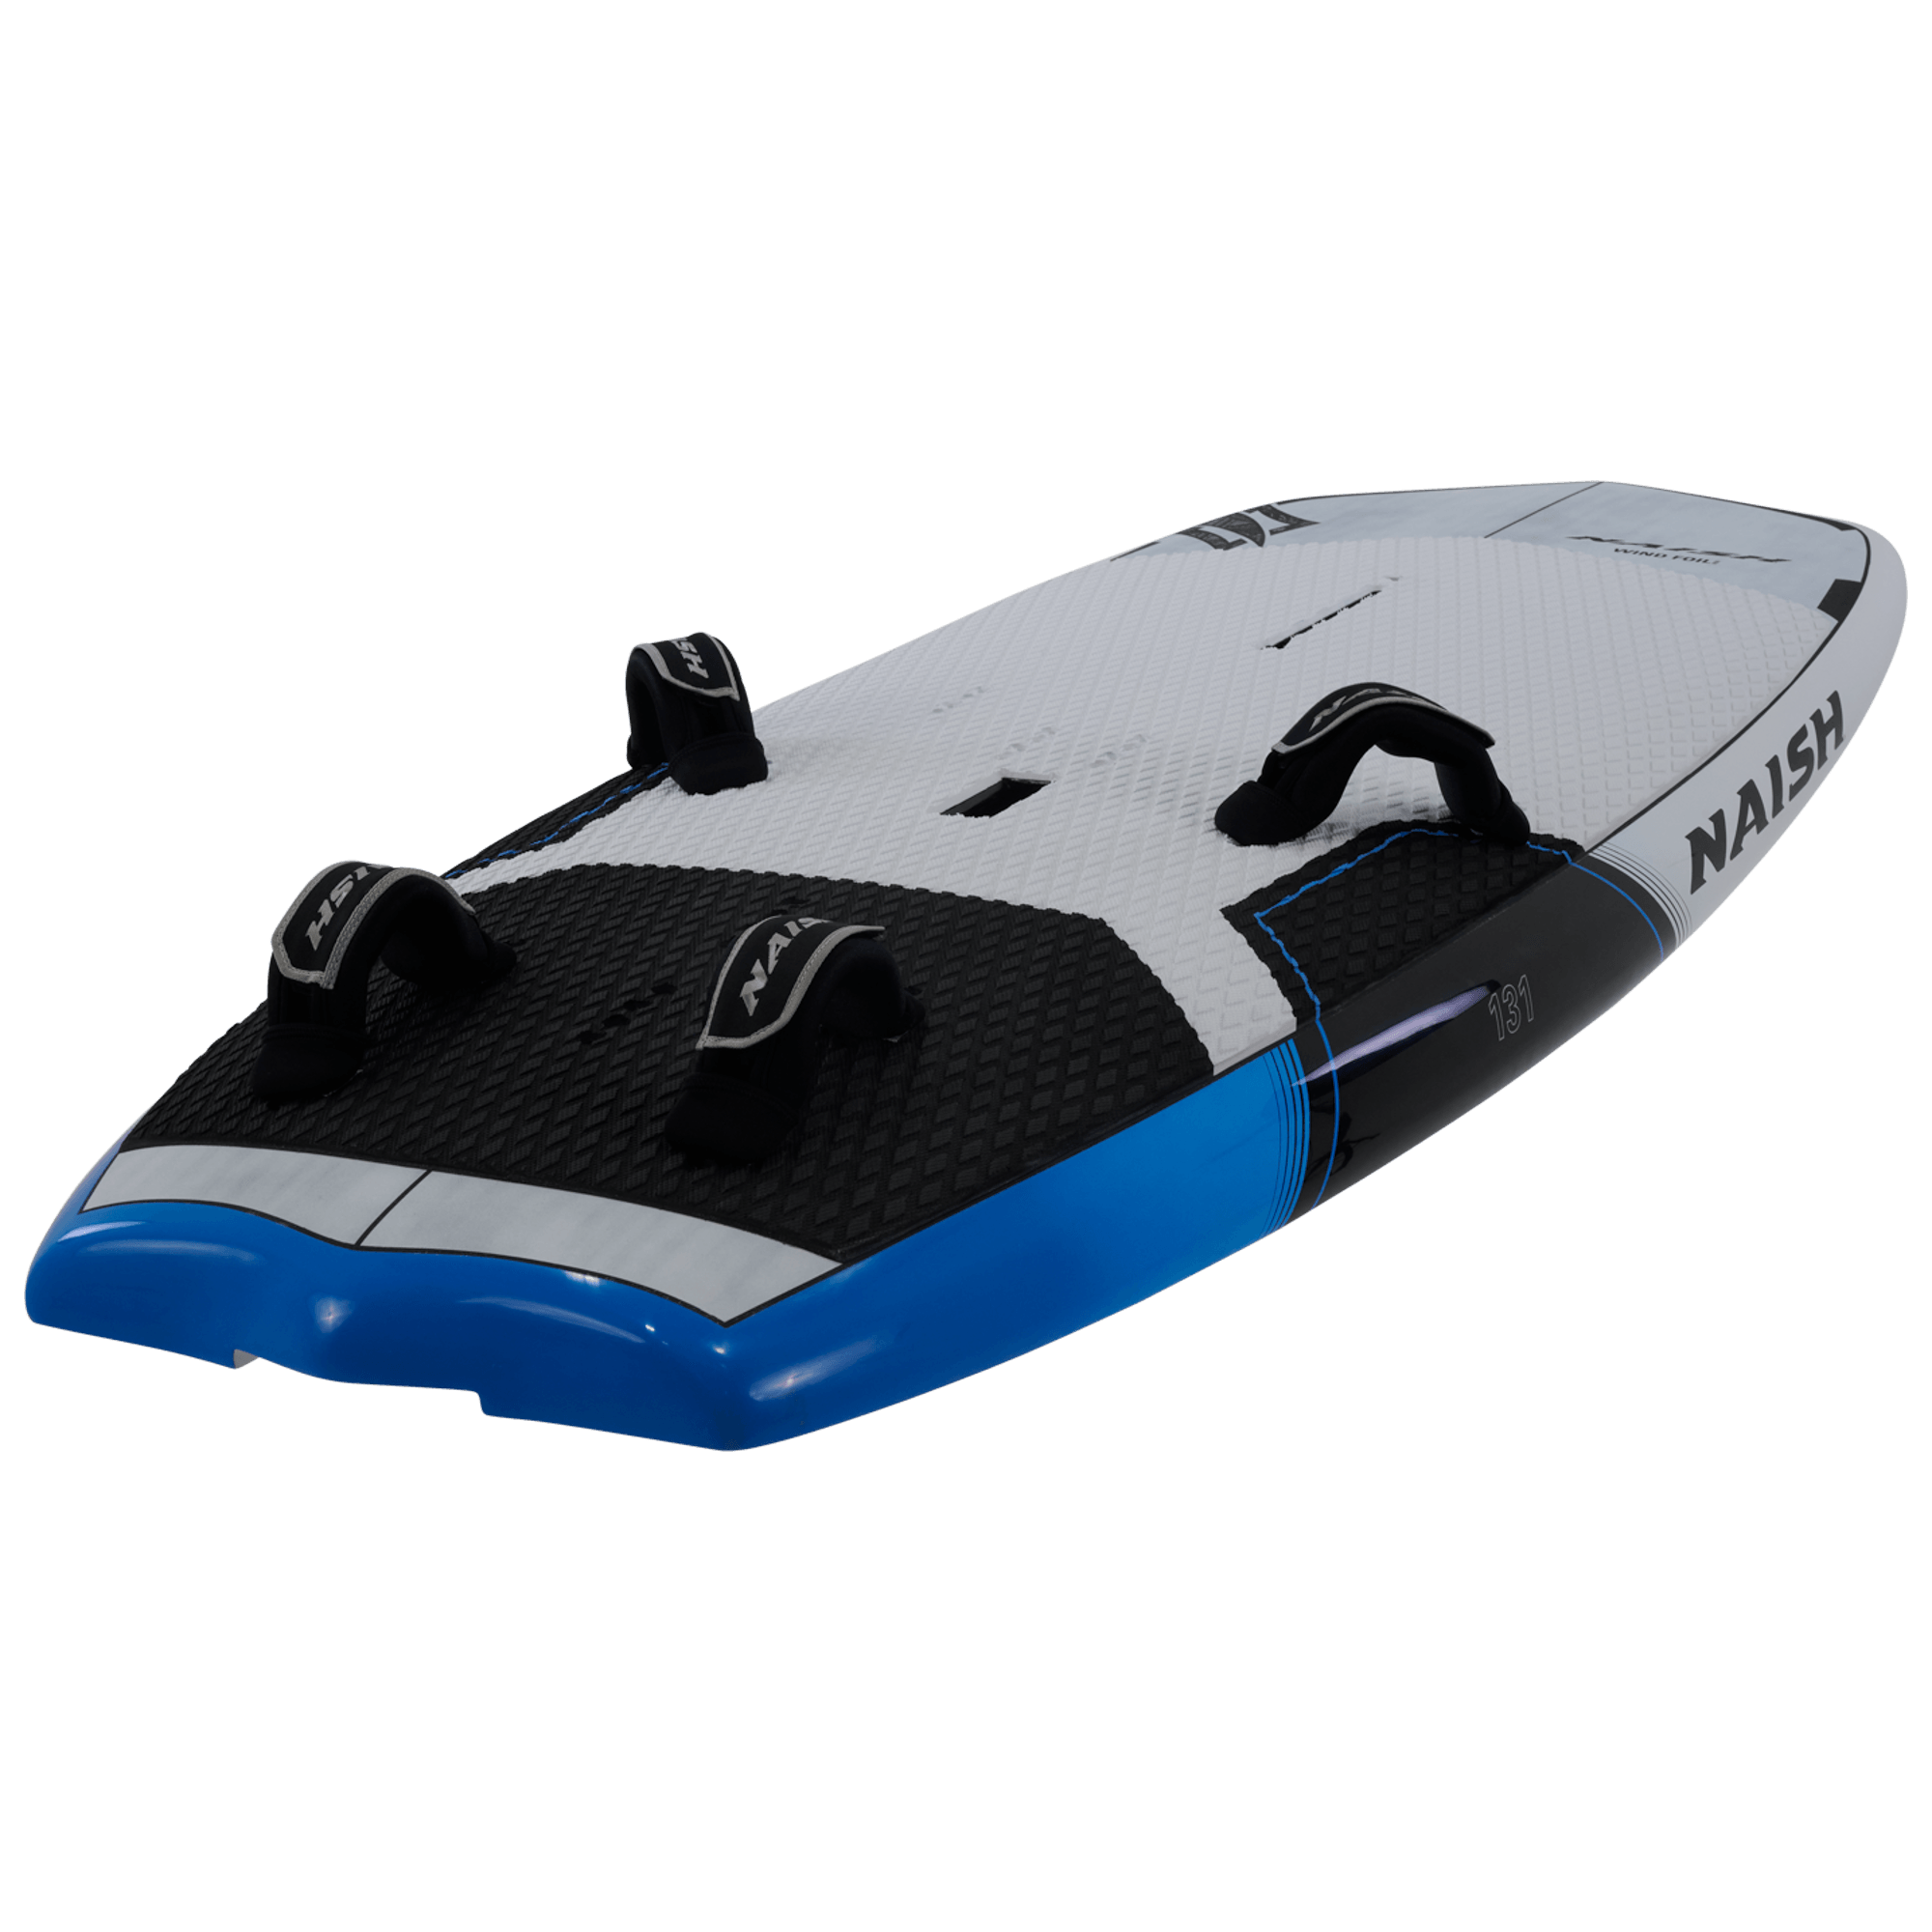 2024 Hover Wind Foil Crossover - Naish.com